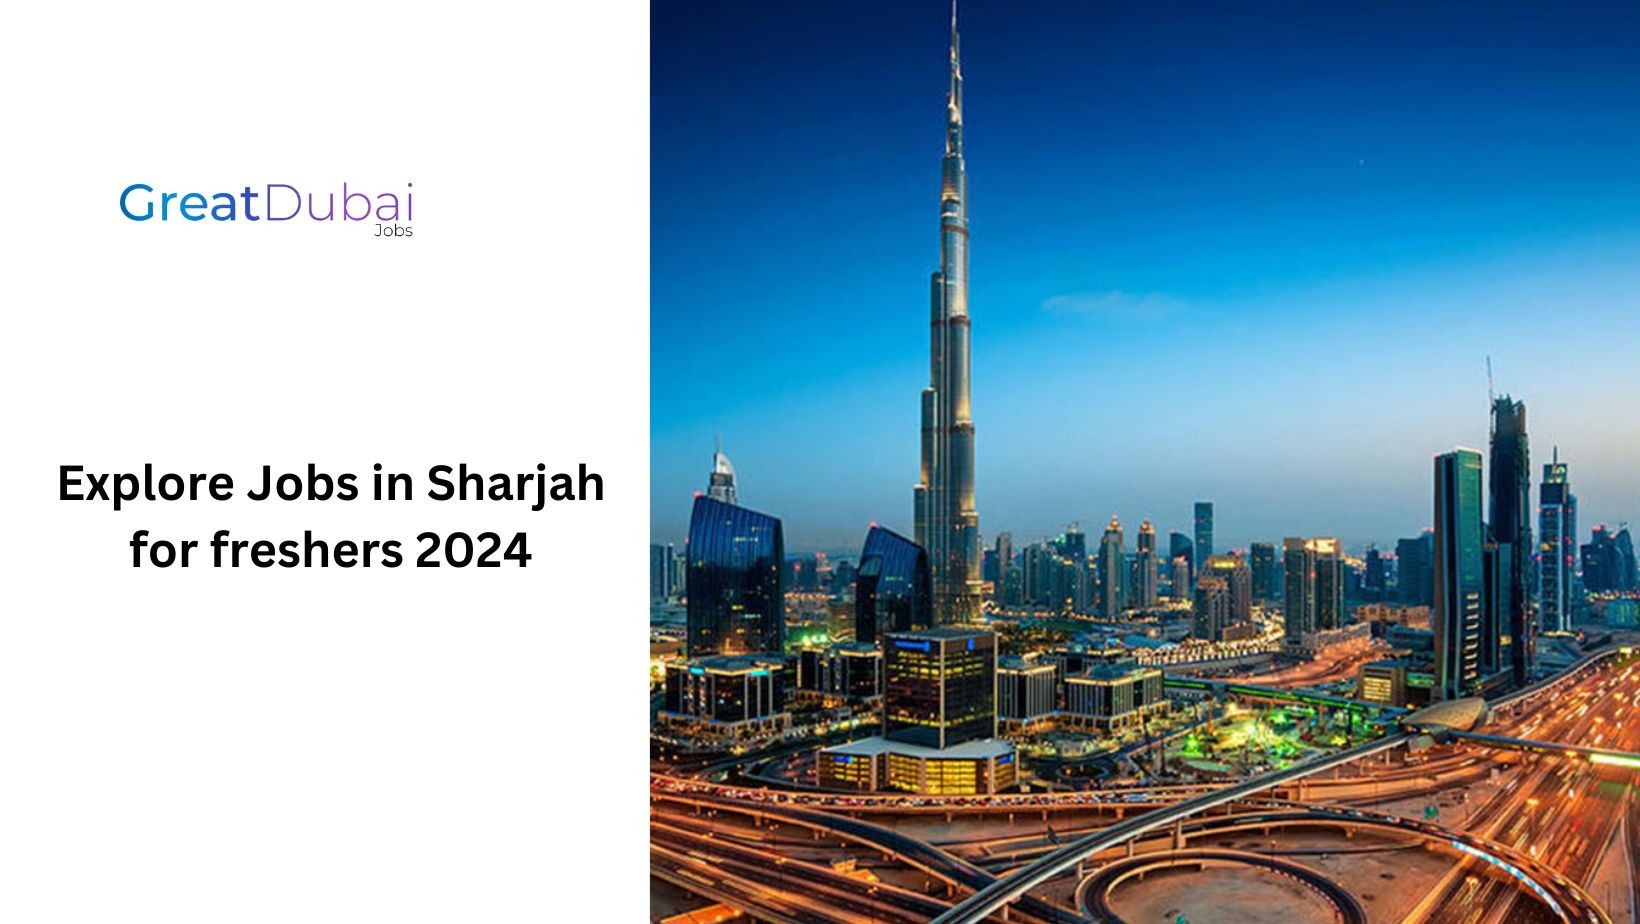 Explore Jobs in Sharjah for freshers 2024